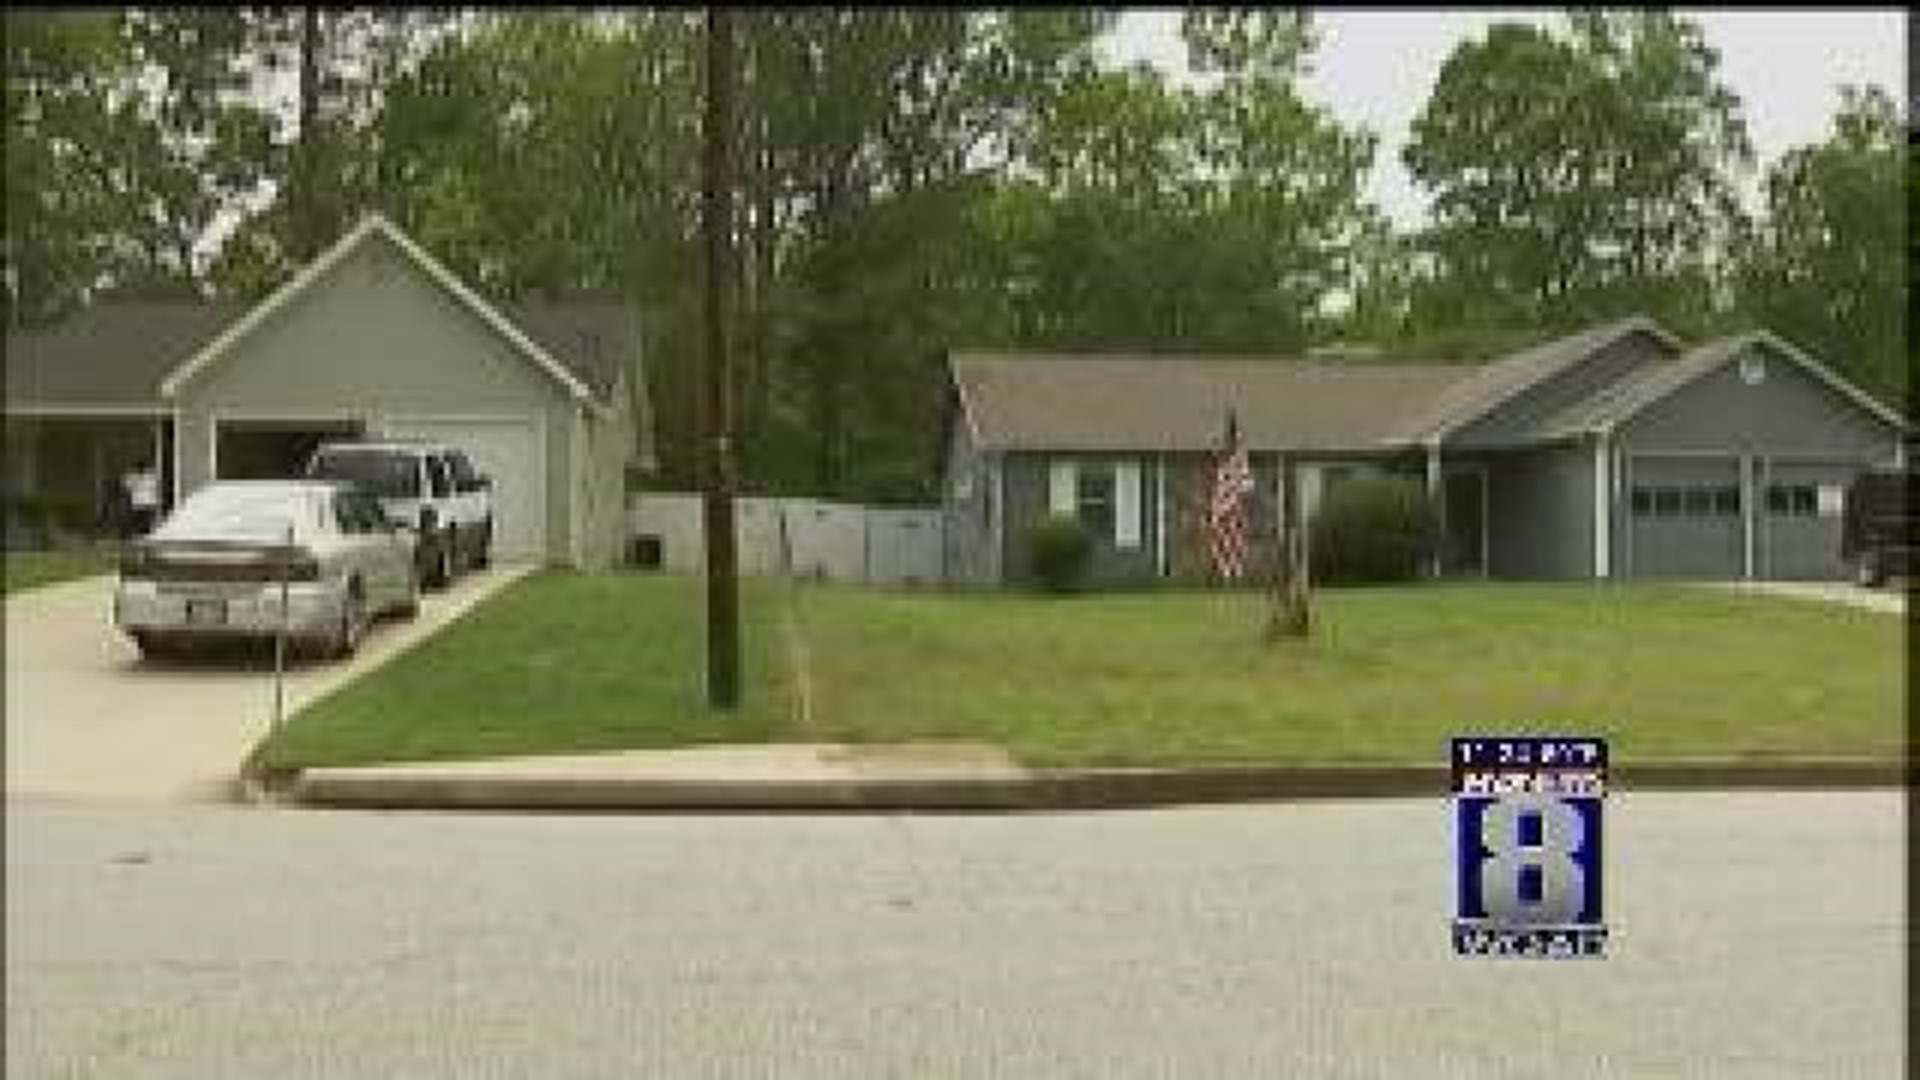 Neighbors disagreement out of control